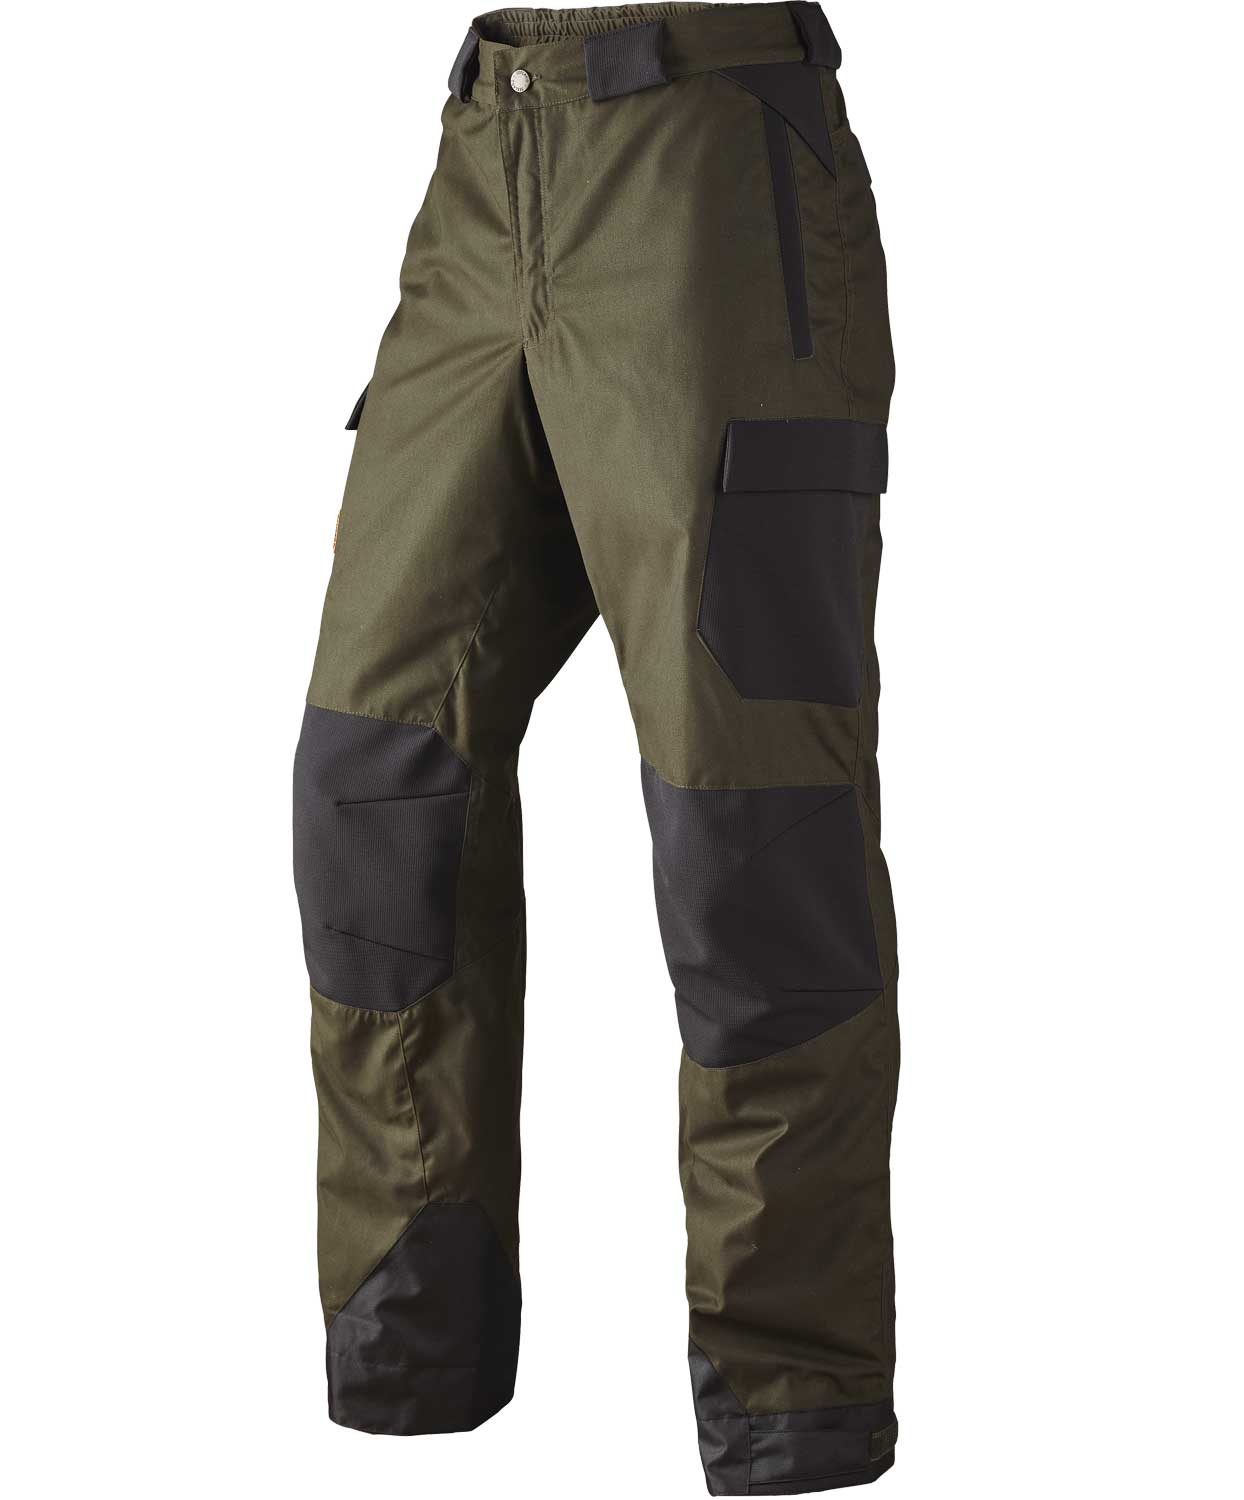 Брюки Seeland Prevail basic grizzly brown - фото 1